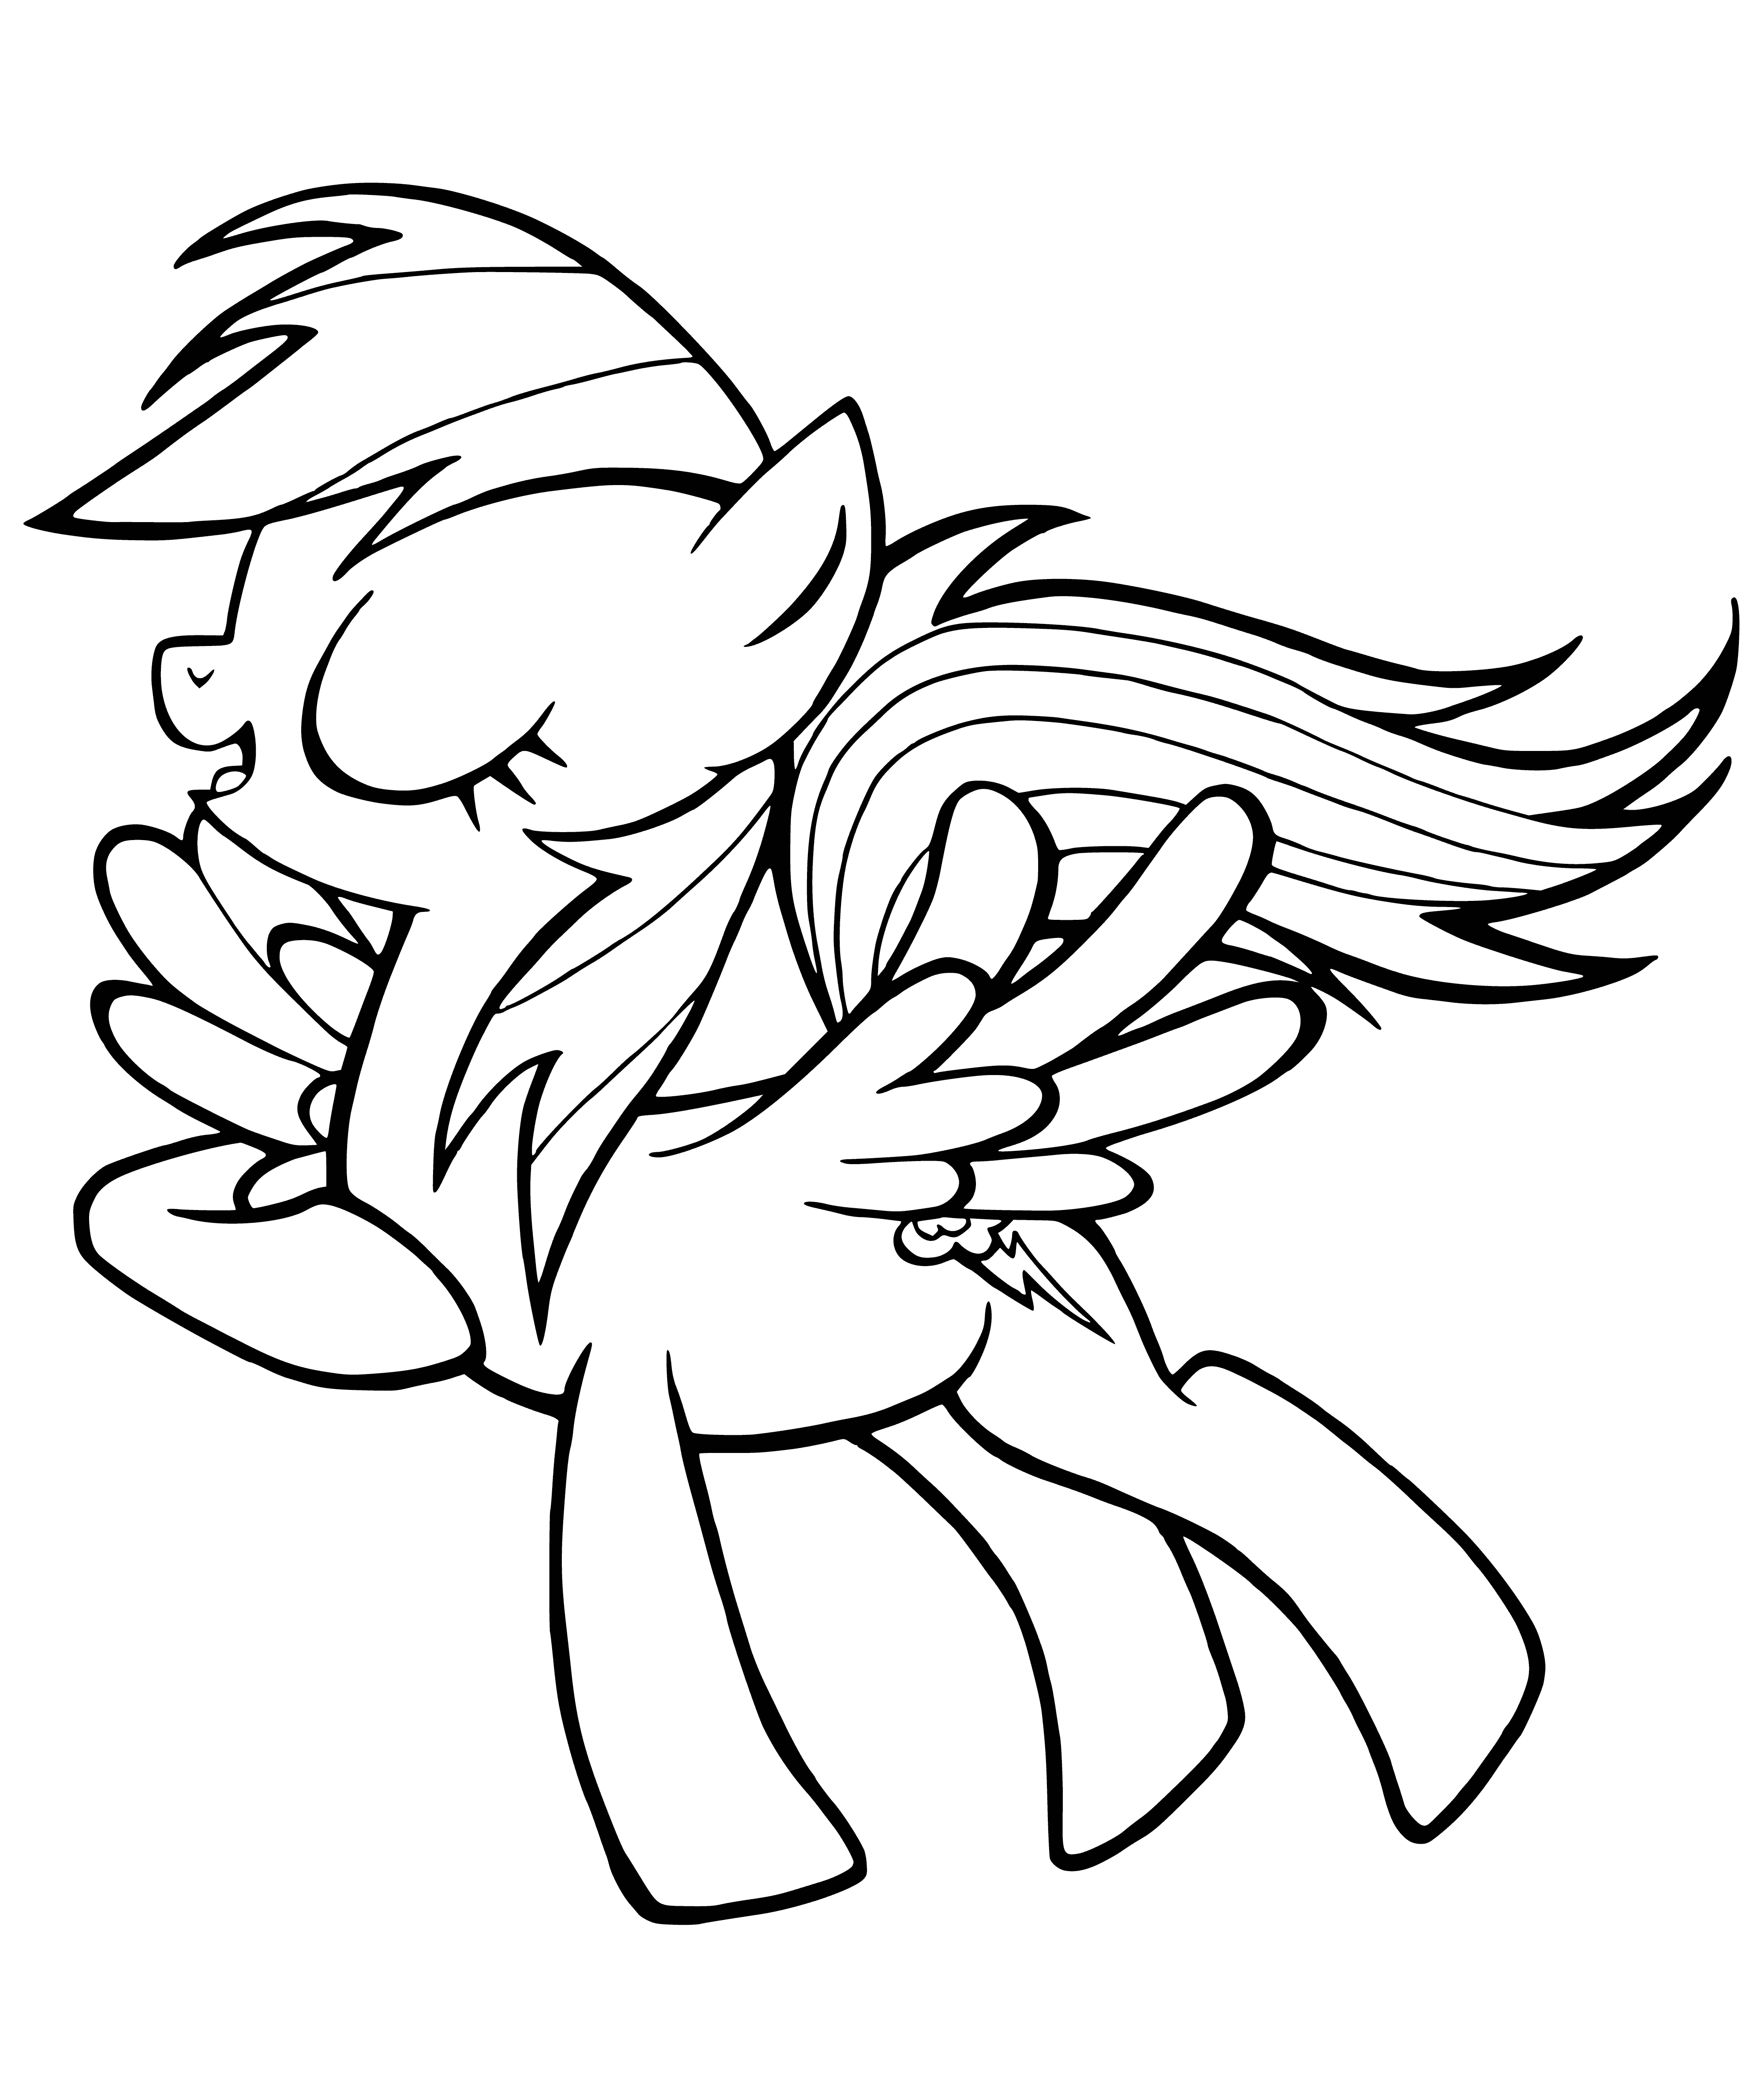 coloring page: Rainbow Dash is a blue pony with a rainbow hairstyle & cutie mark. Member of the elite flying ponies Wonderbolts.